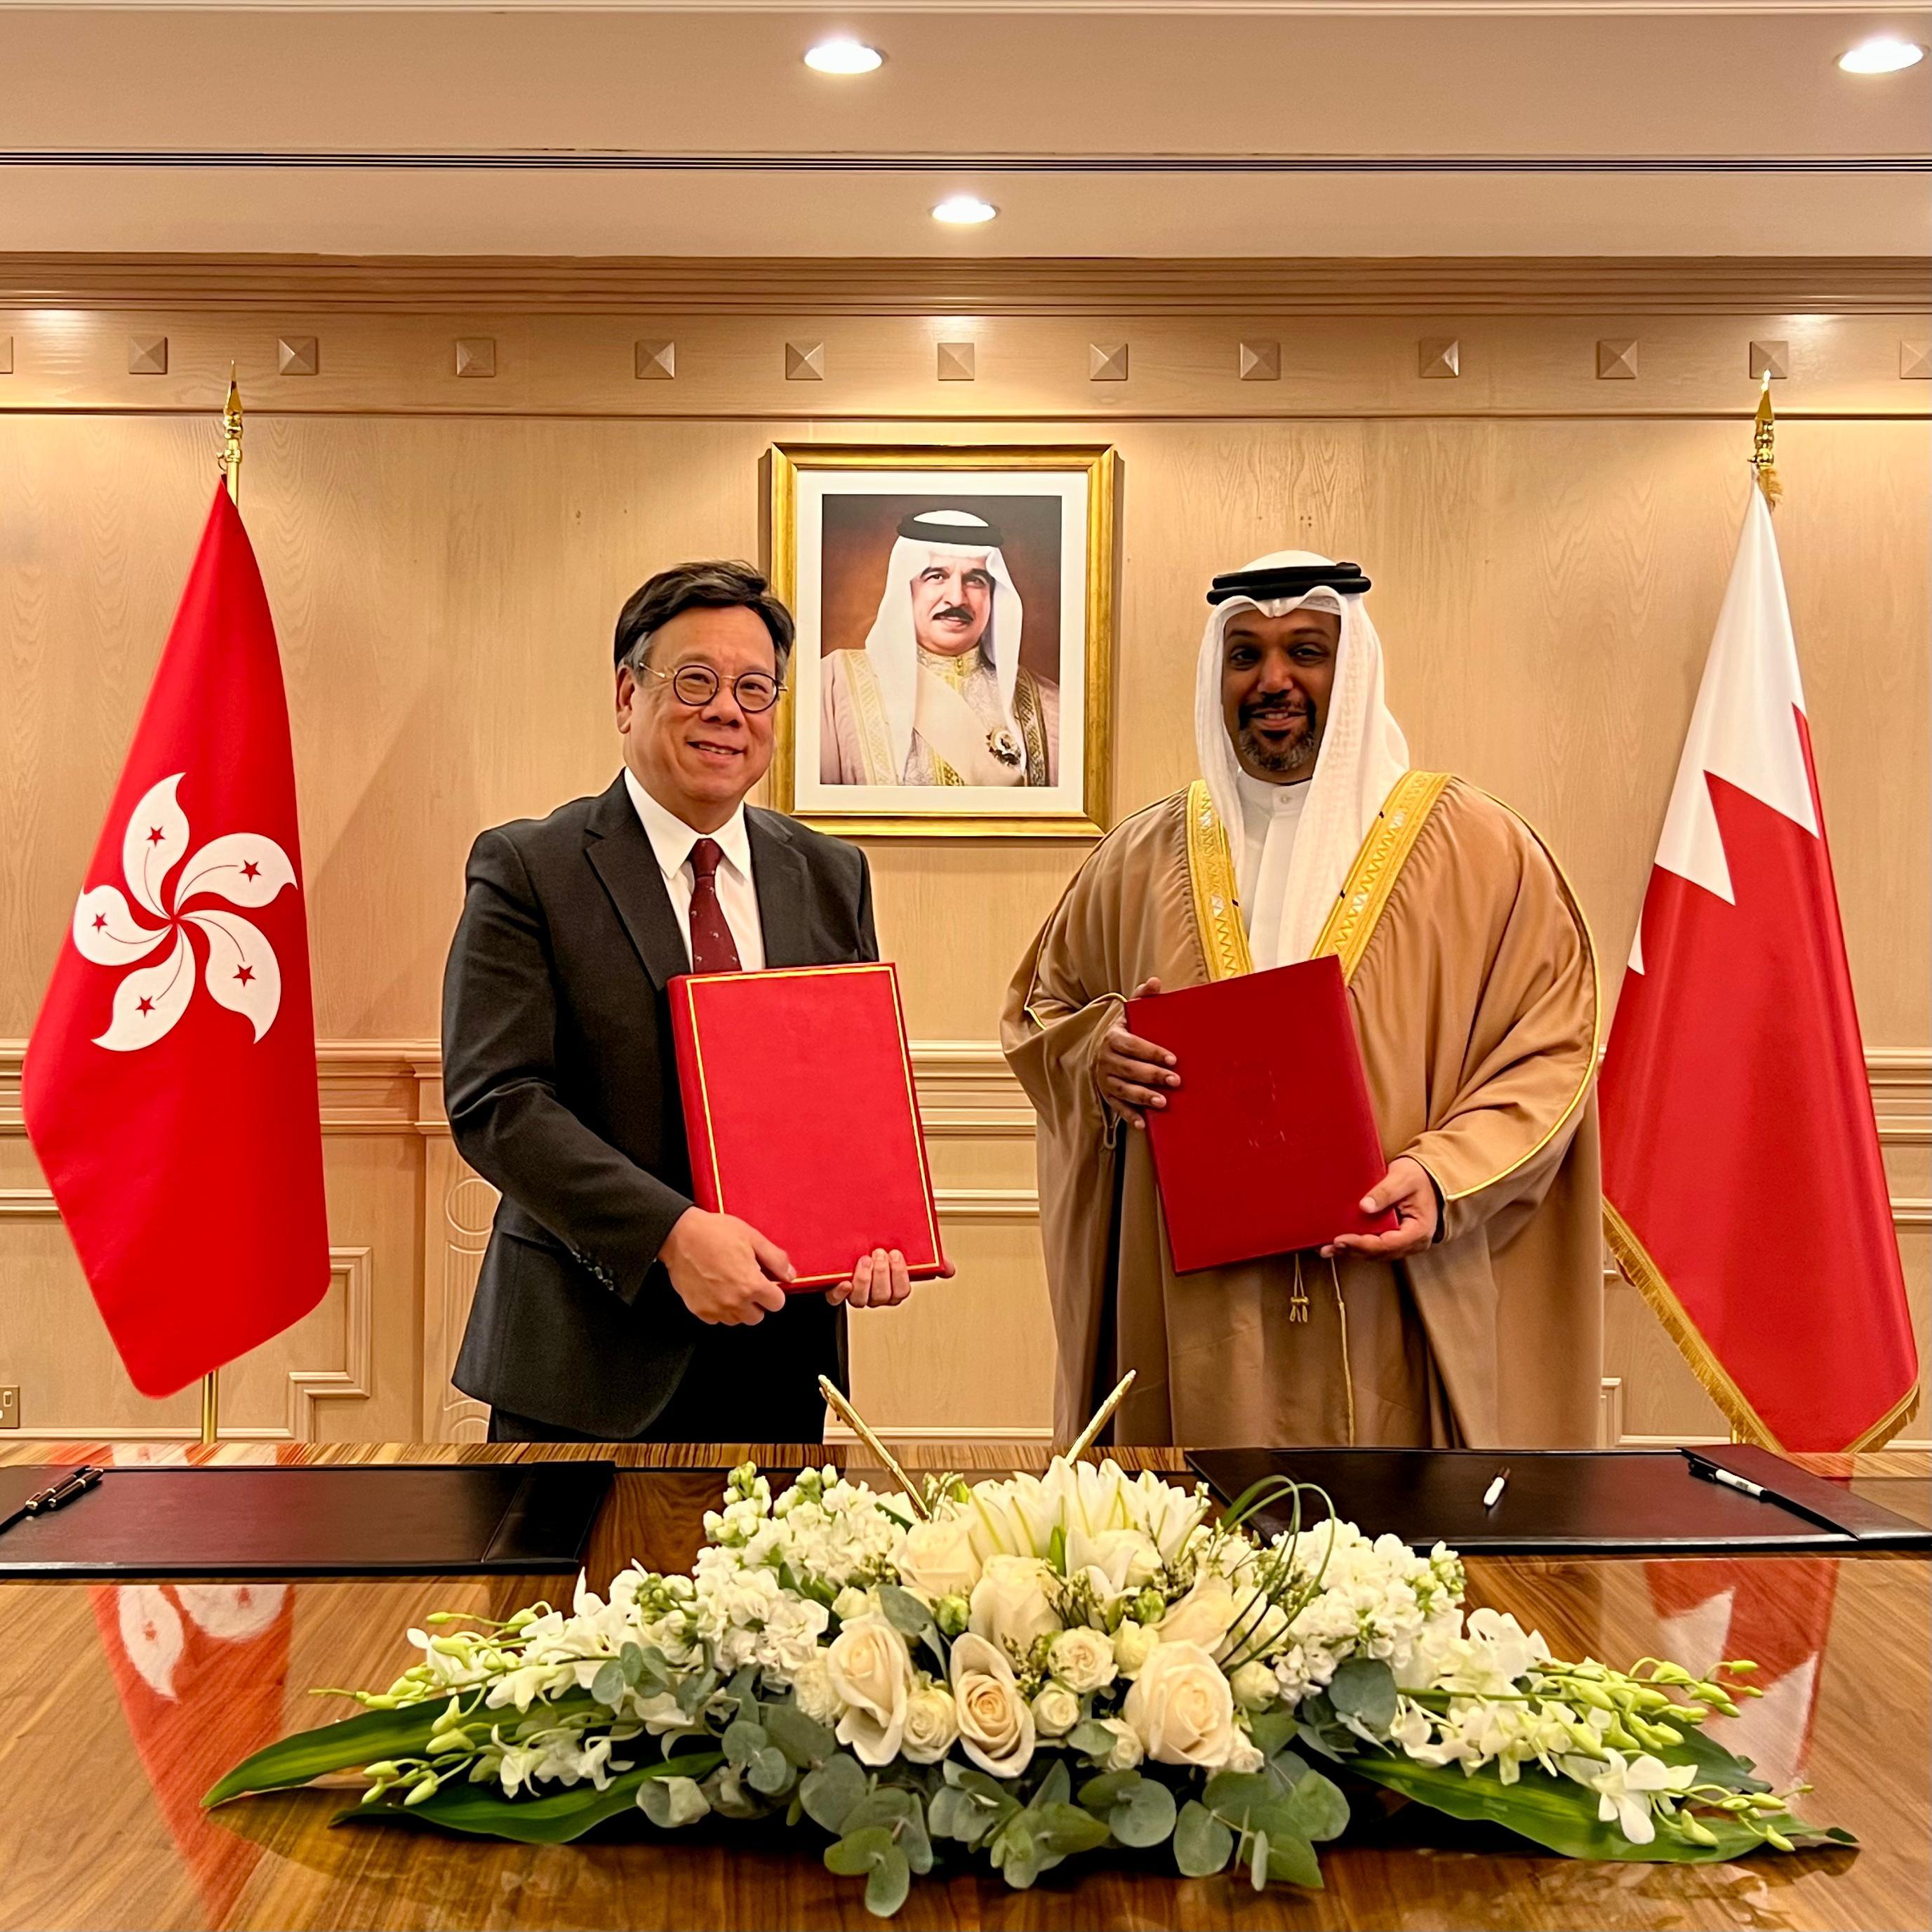 The Secretary for Commerce and Economic Development, Mr Algernon Yau, and the Minister of Finance and National Economy of Bahrain, Shaikh Salman bin Khalifa Al Khalifa, signed the Hong Kong-Bahrain Investment Promotion and Protection Agreement (IPPA) in Manama, Bahrain today (March 3, Manama time). Mr Yau (left) and Shaikh Salman bin Khalifa Al Khalifa (right) are pictured after the signing ceremony.